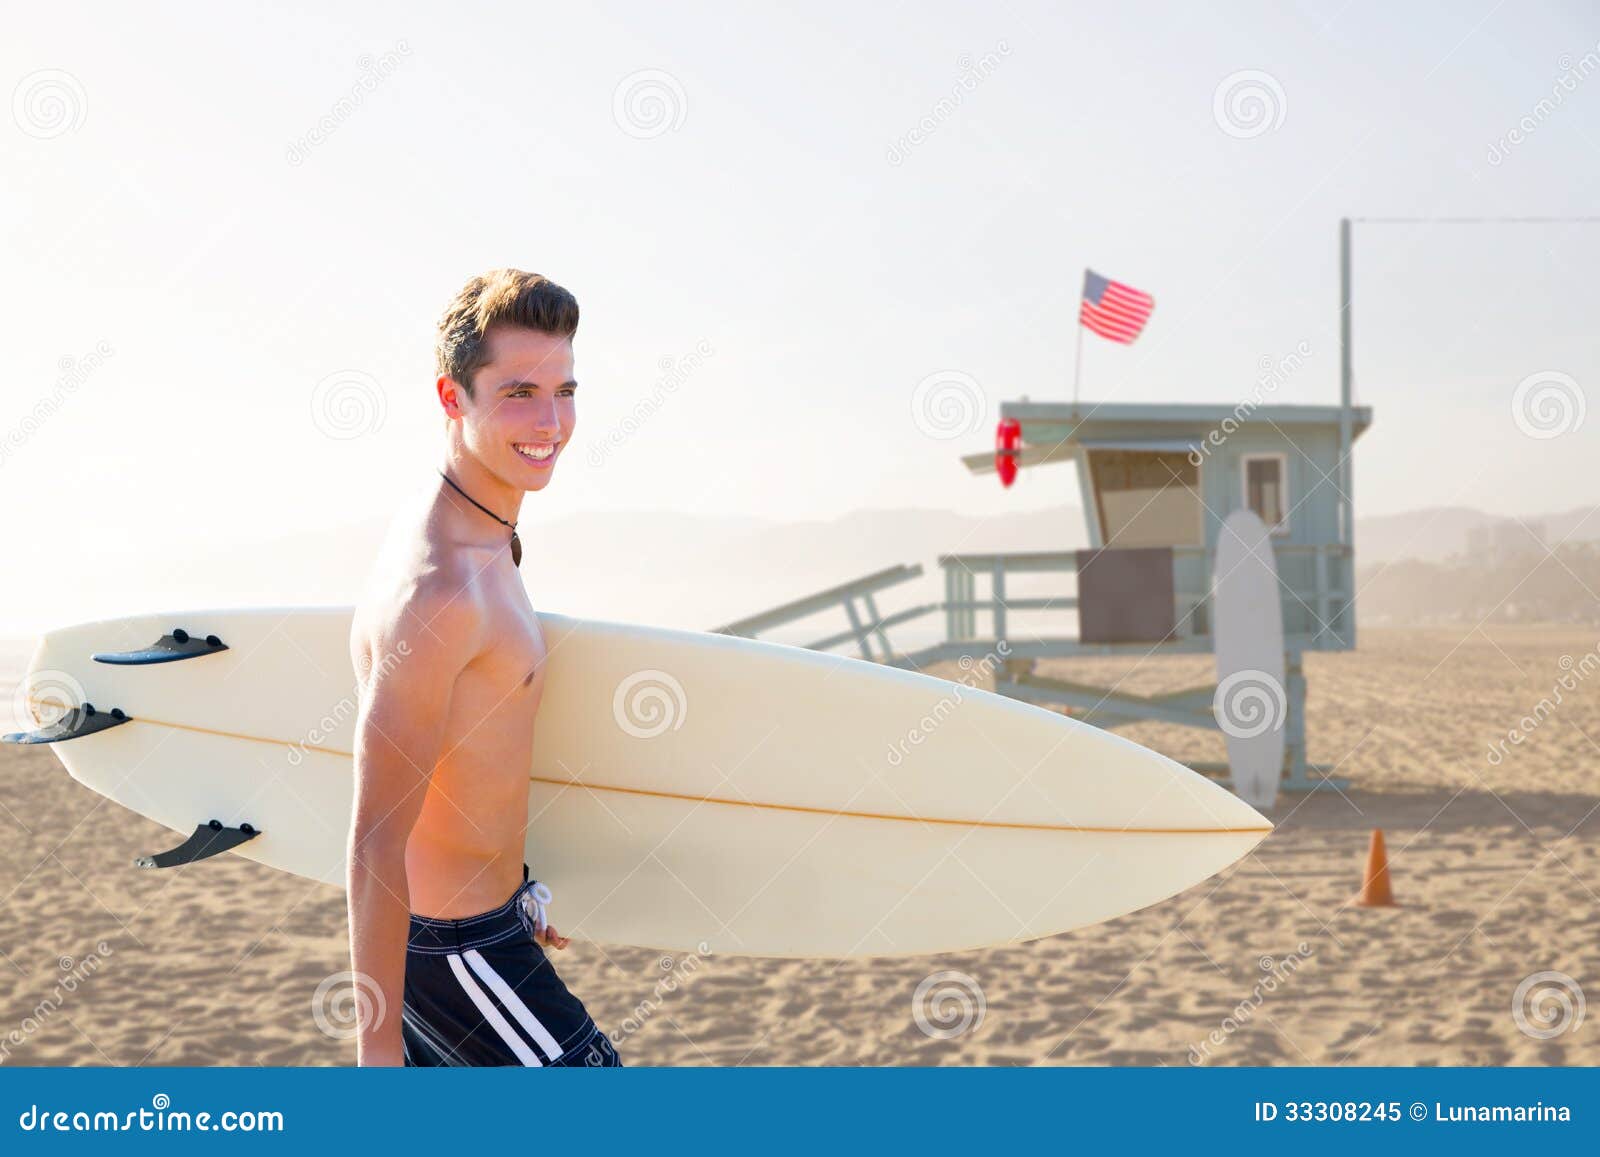 Surfer Boy Teen with Surfboard in Santa Monica Stock Image - Image of ...